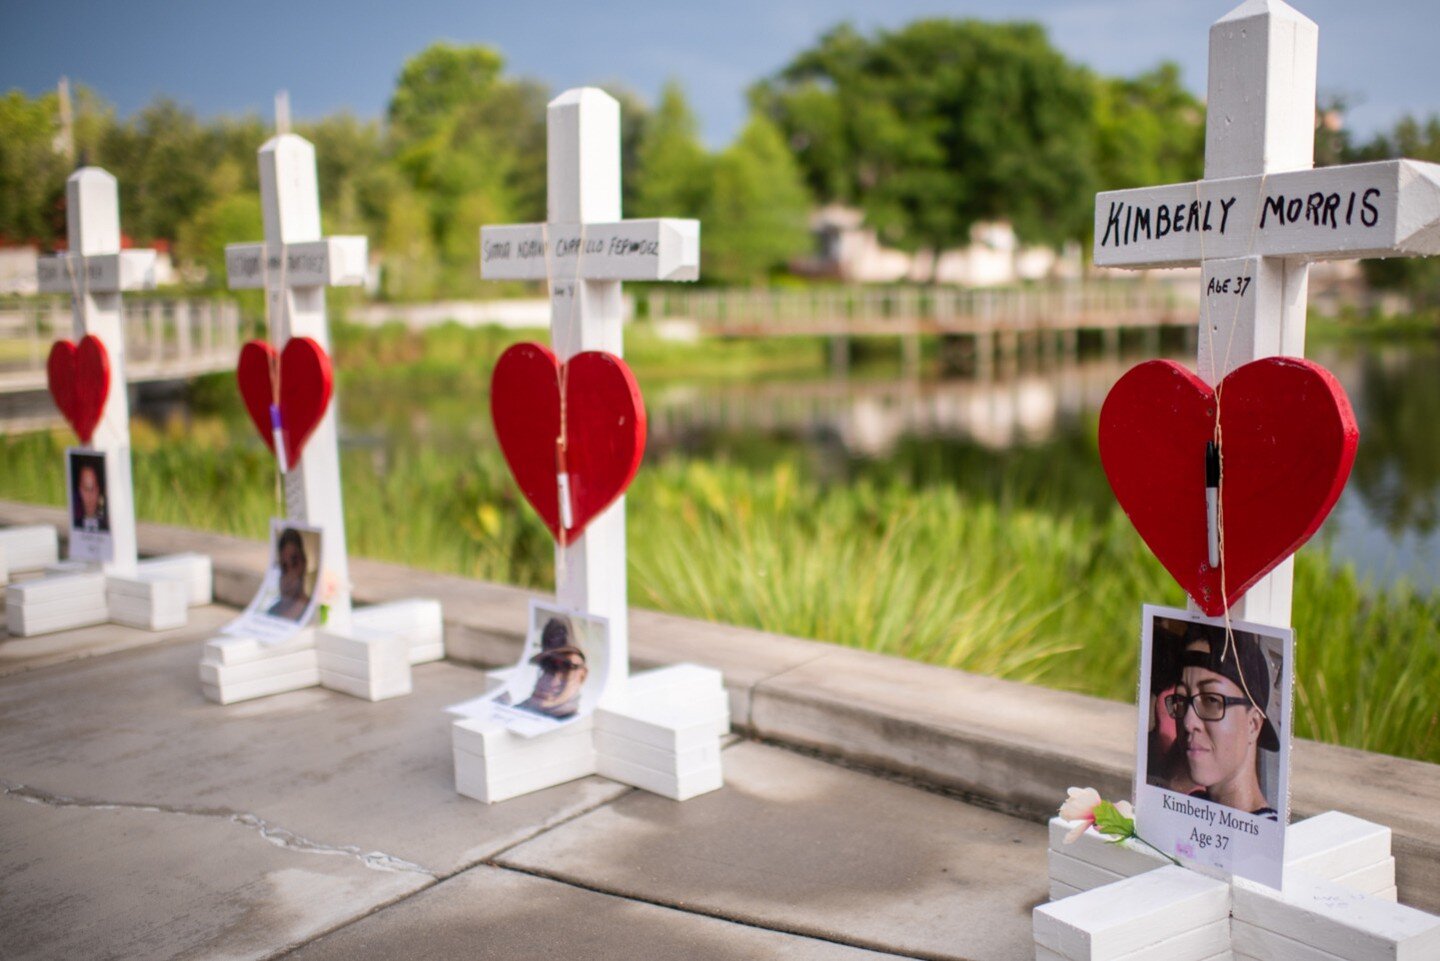 Are these the memorial crosses for the #uvaldeshooting? The #Parklandshooting? The homophobic massacre at the #pulsenightclub? The racist assault in the #Buffalo supermarket? #Elpaso? #lagunawoods? #lasvegas?

Where will the next set of crosses get p